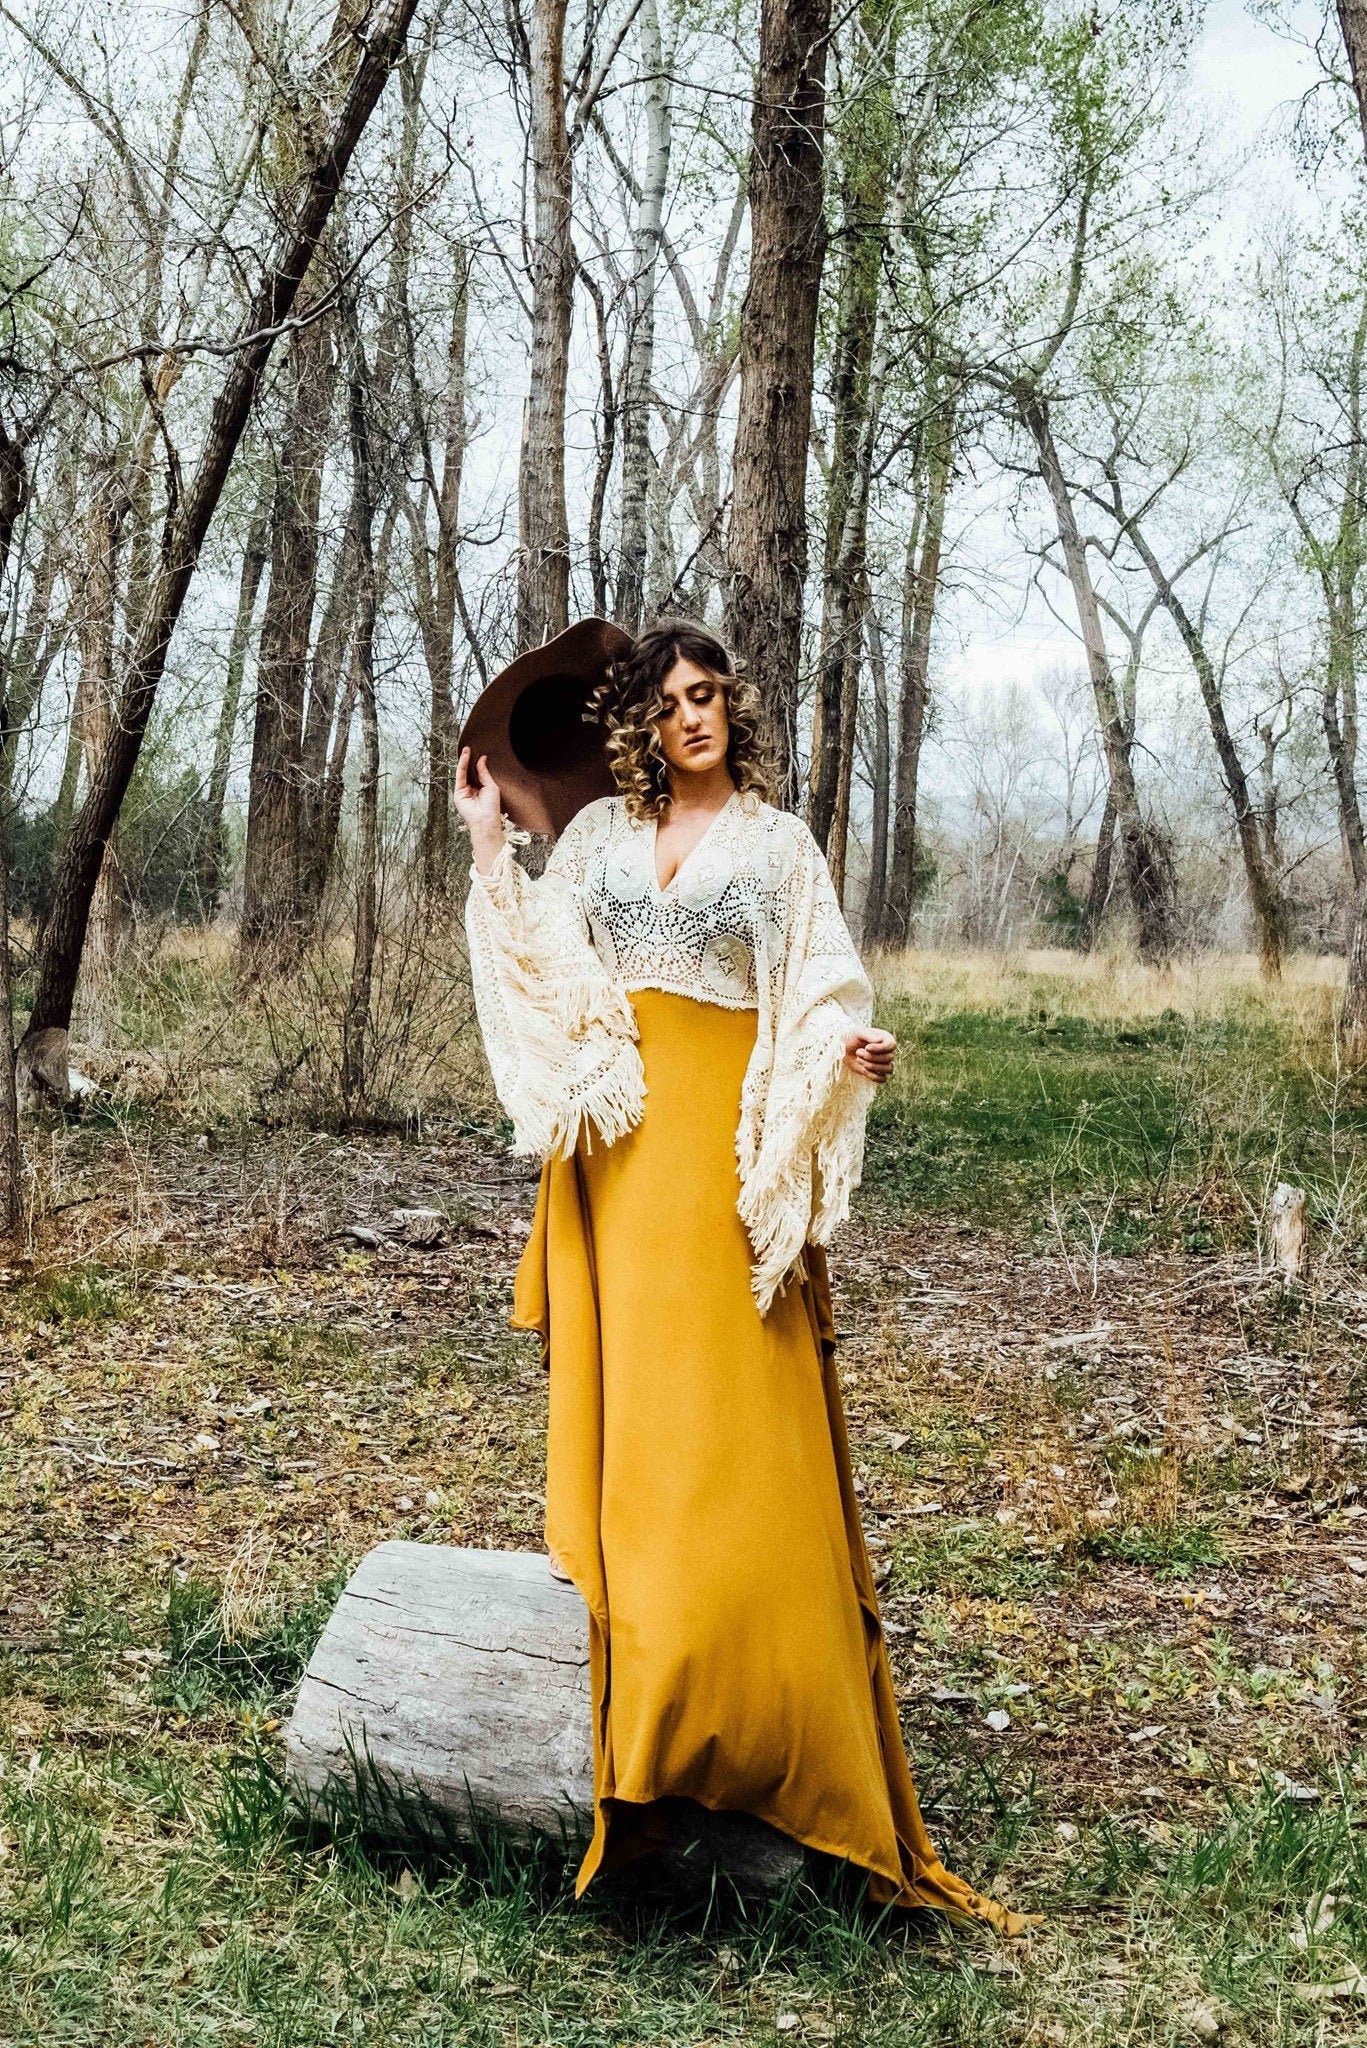 Try To Be Boho Embroidered Eyelet Maxi Dress in Mustard